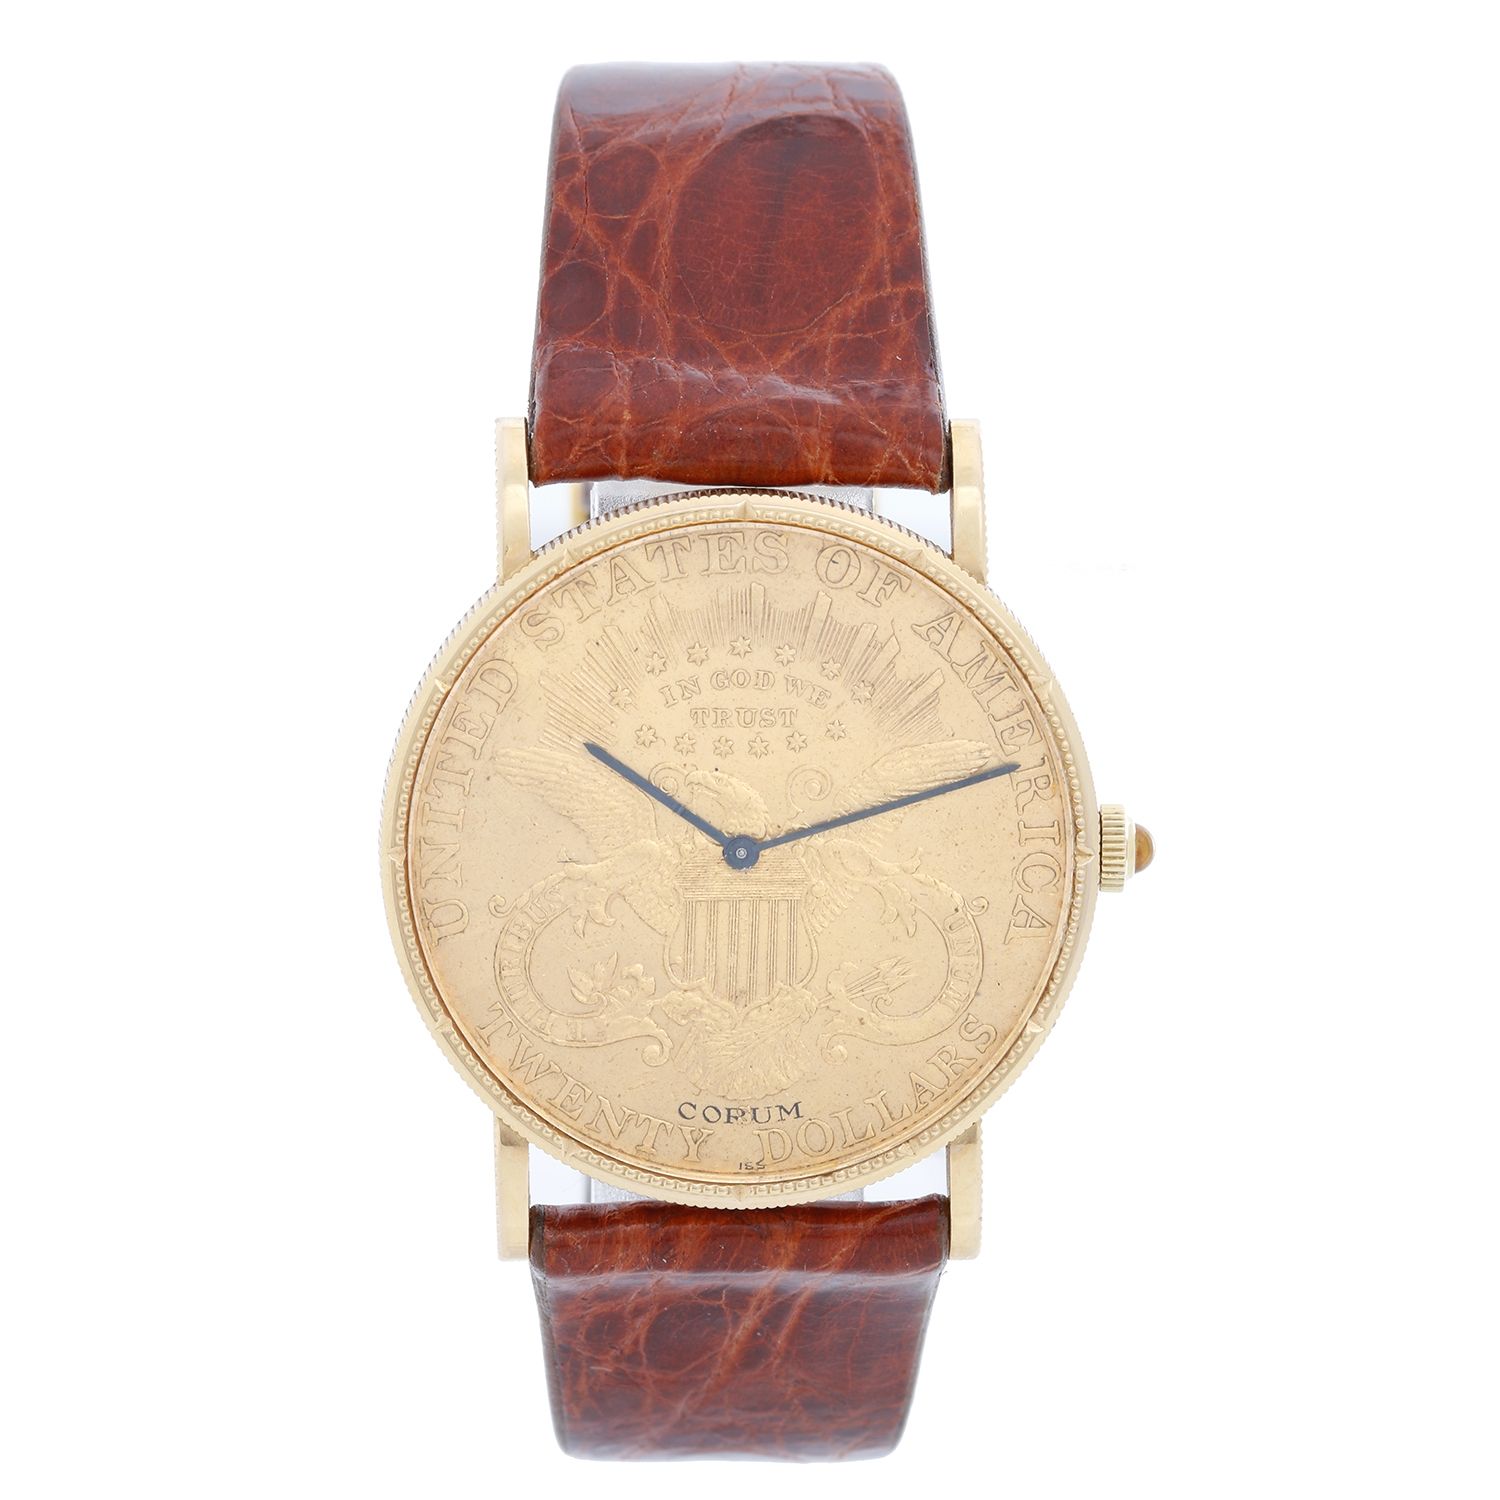 Sold at Auction: Le Jour Silver Dollar Watch